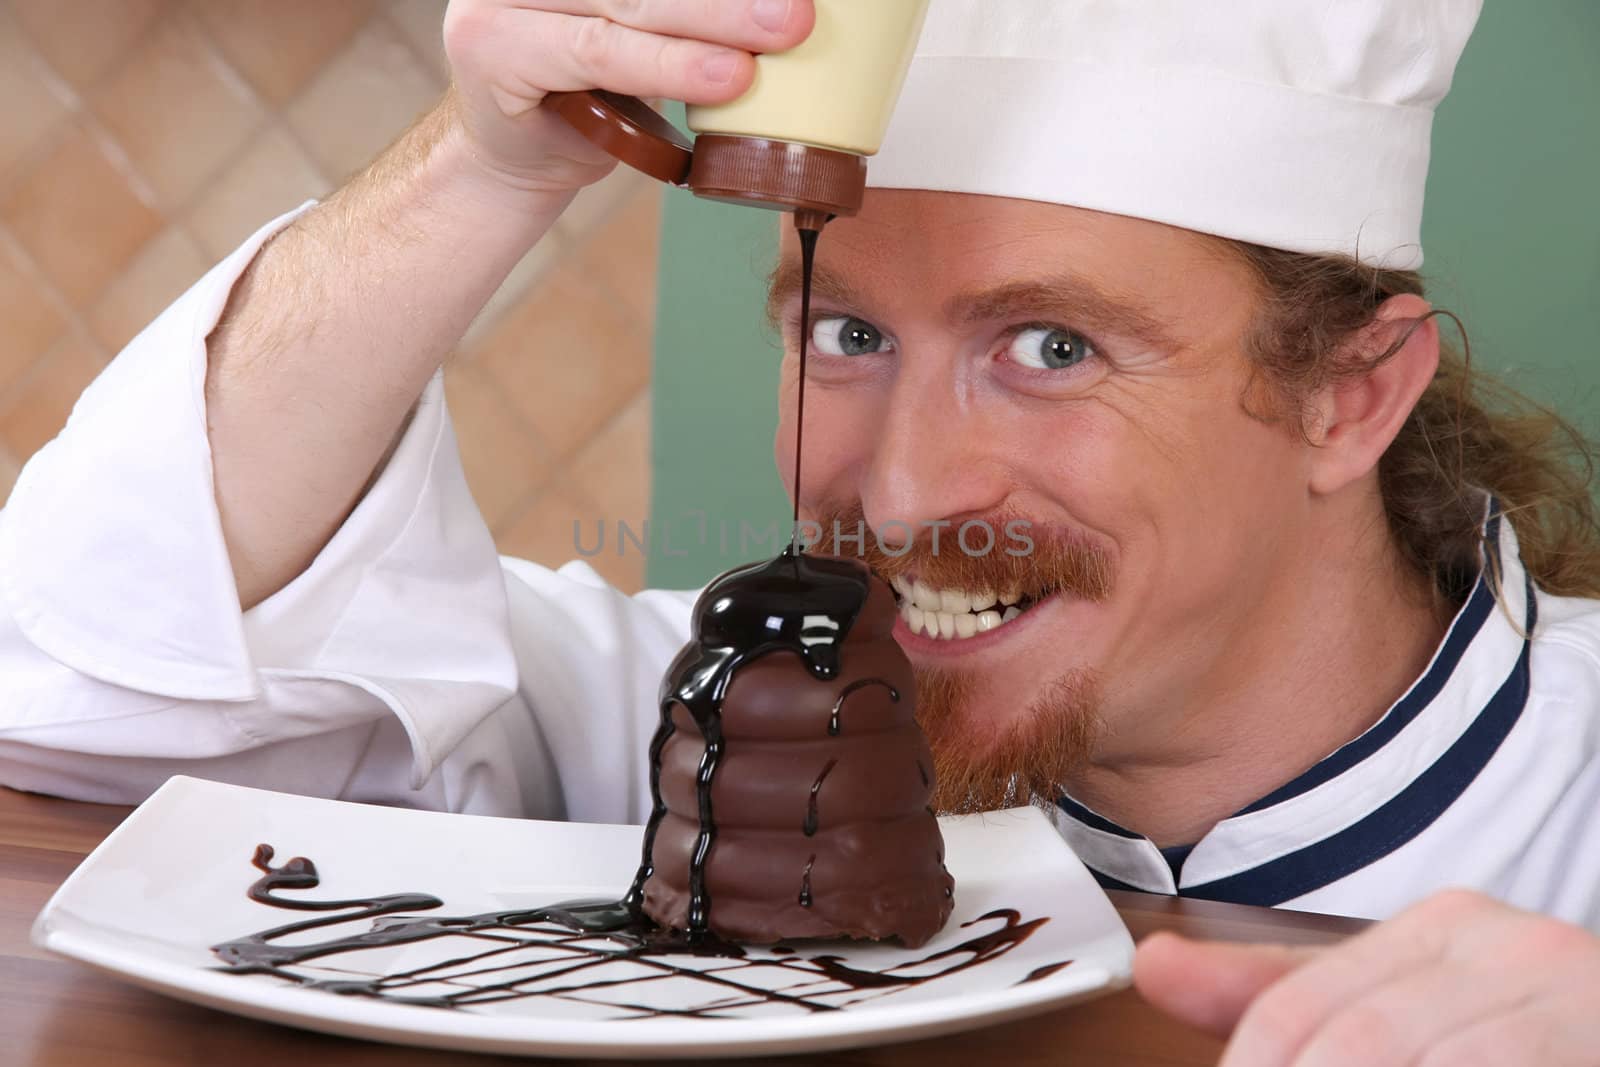 Funny young chef added chocolate sauce at piece of cake by vladacanon